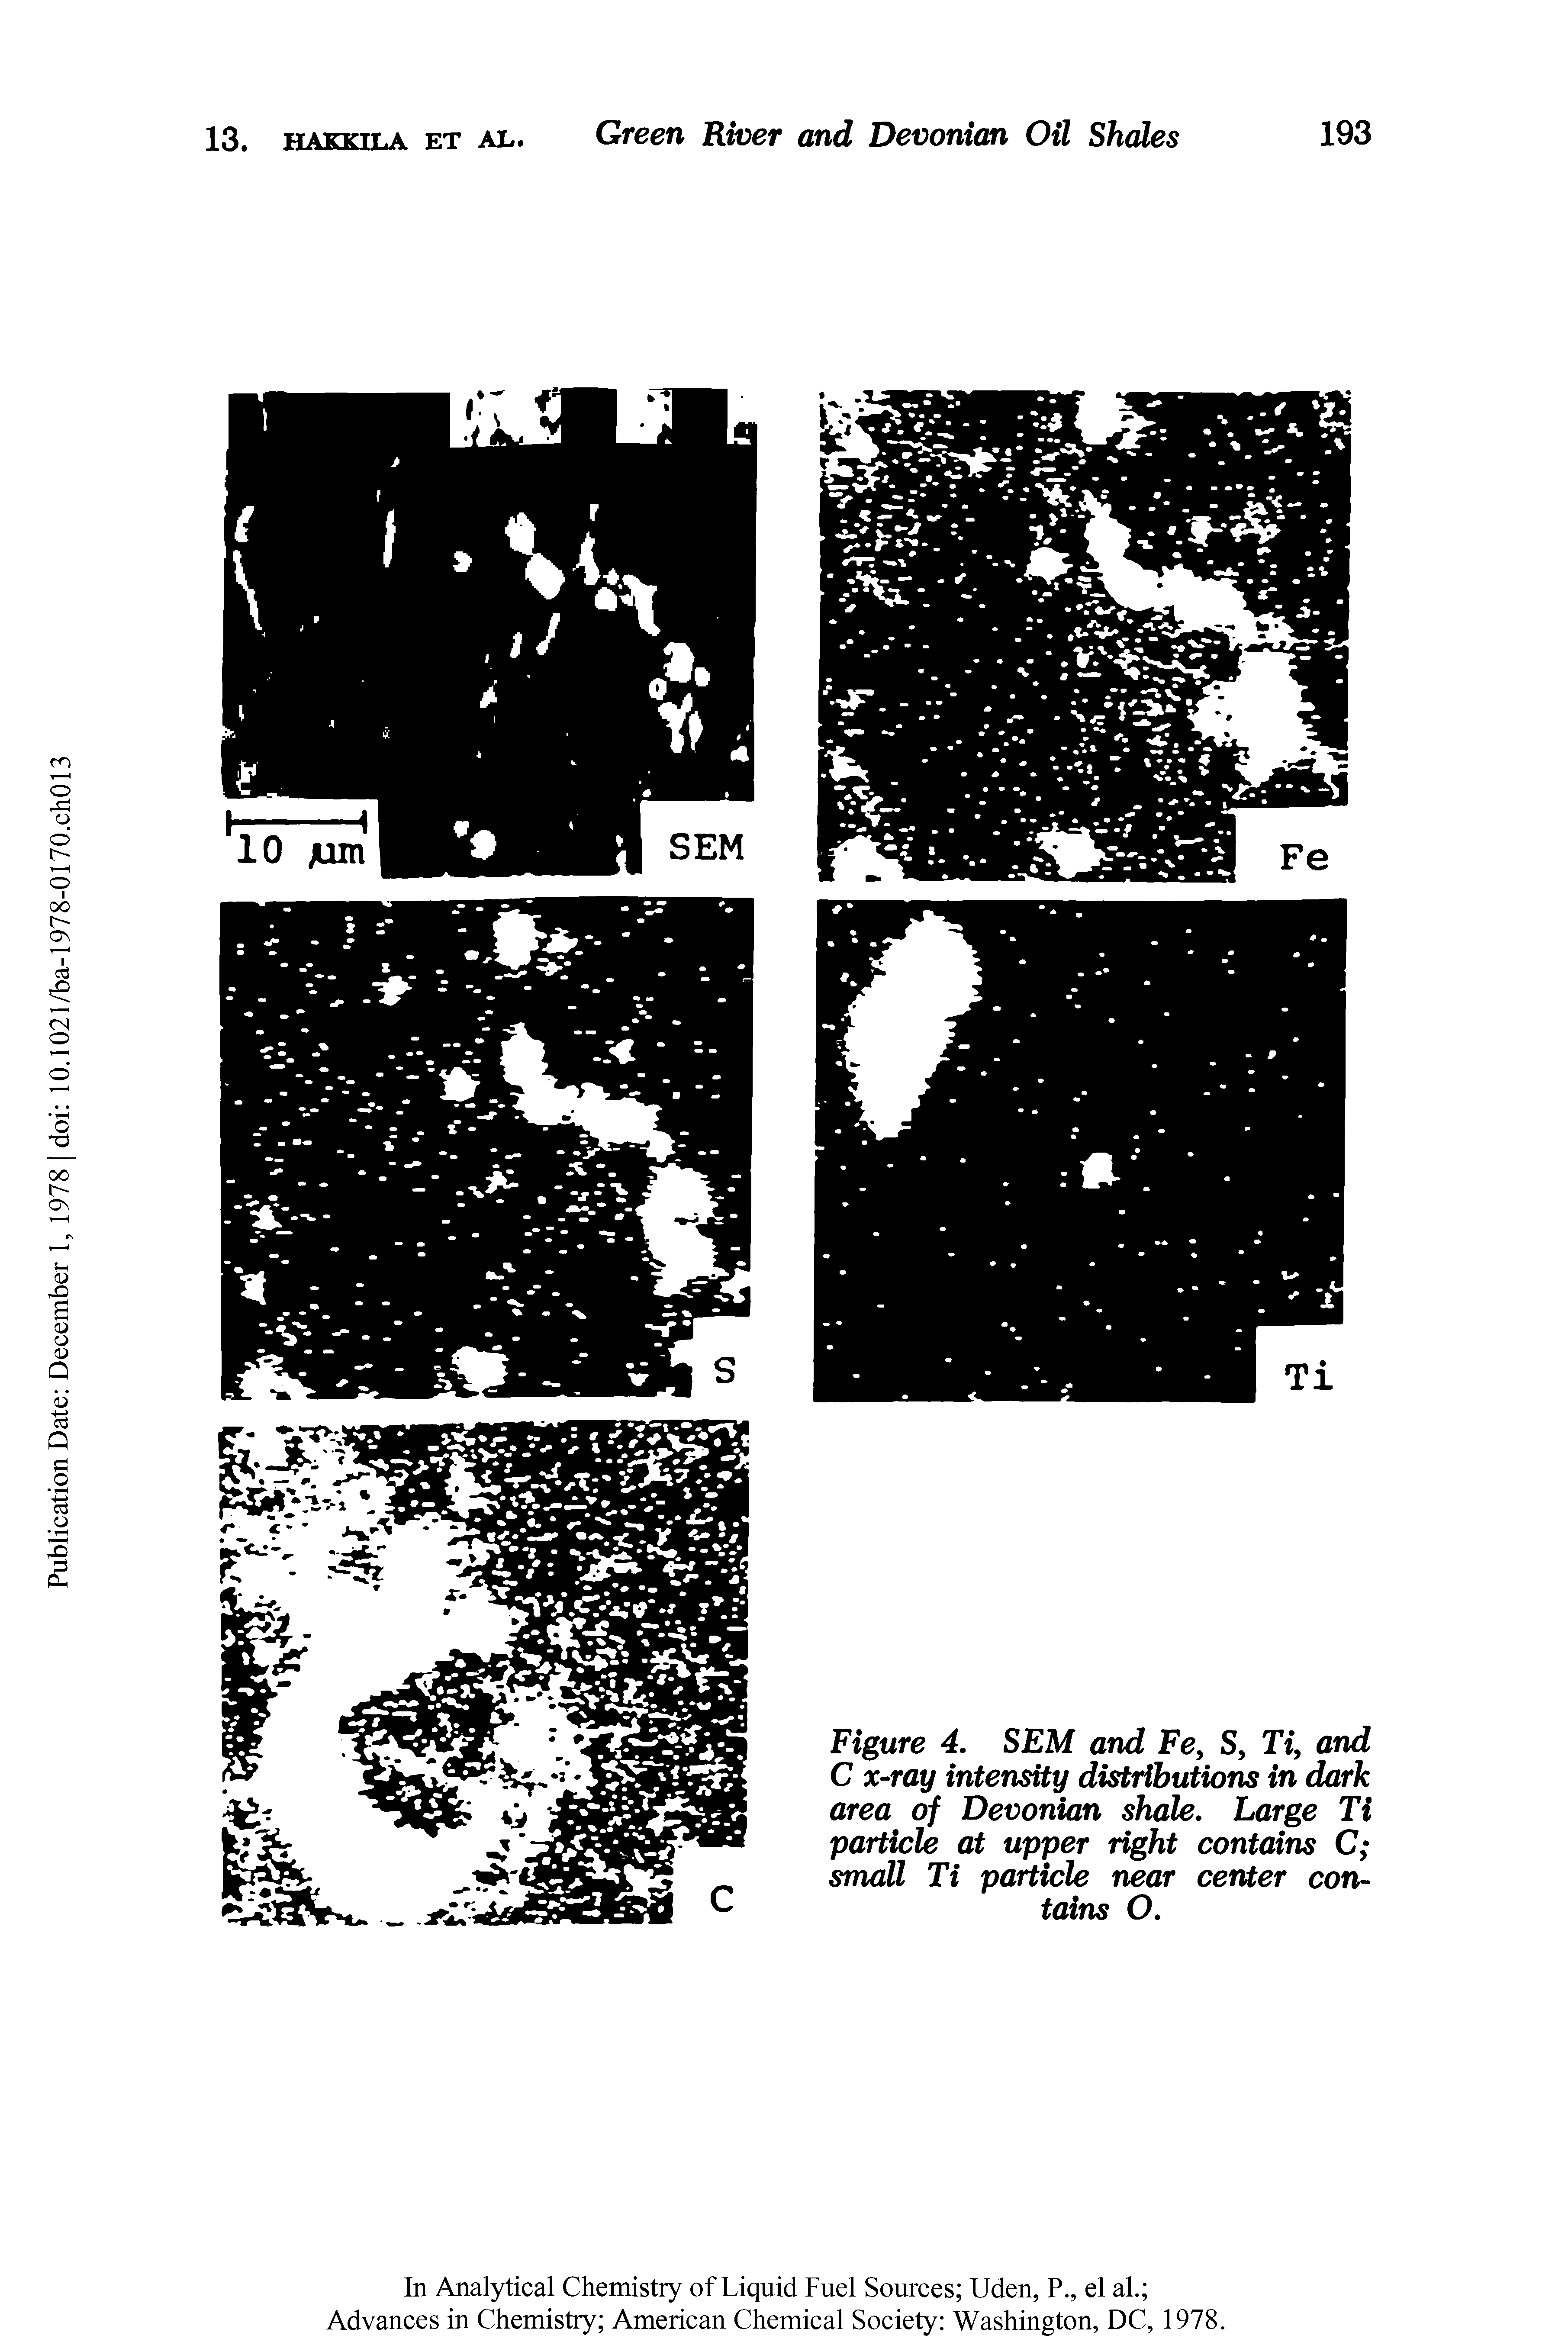 Figure 4. SEM and Fe, S, Ti, and C x-ray intensity distributions in dark area of Devonian shale. Large Ti particle at upper right contains C small Ti particle near center contains O.